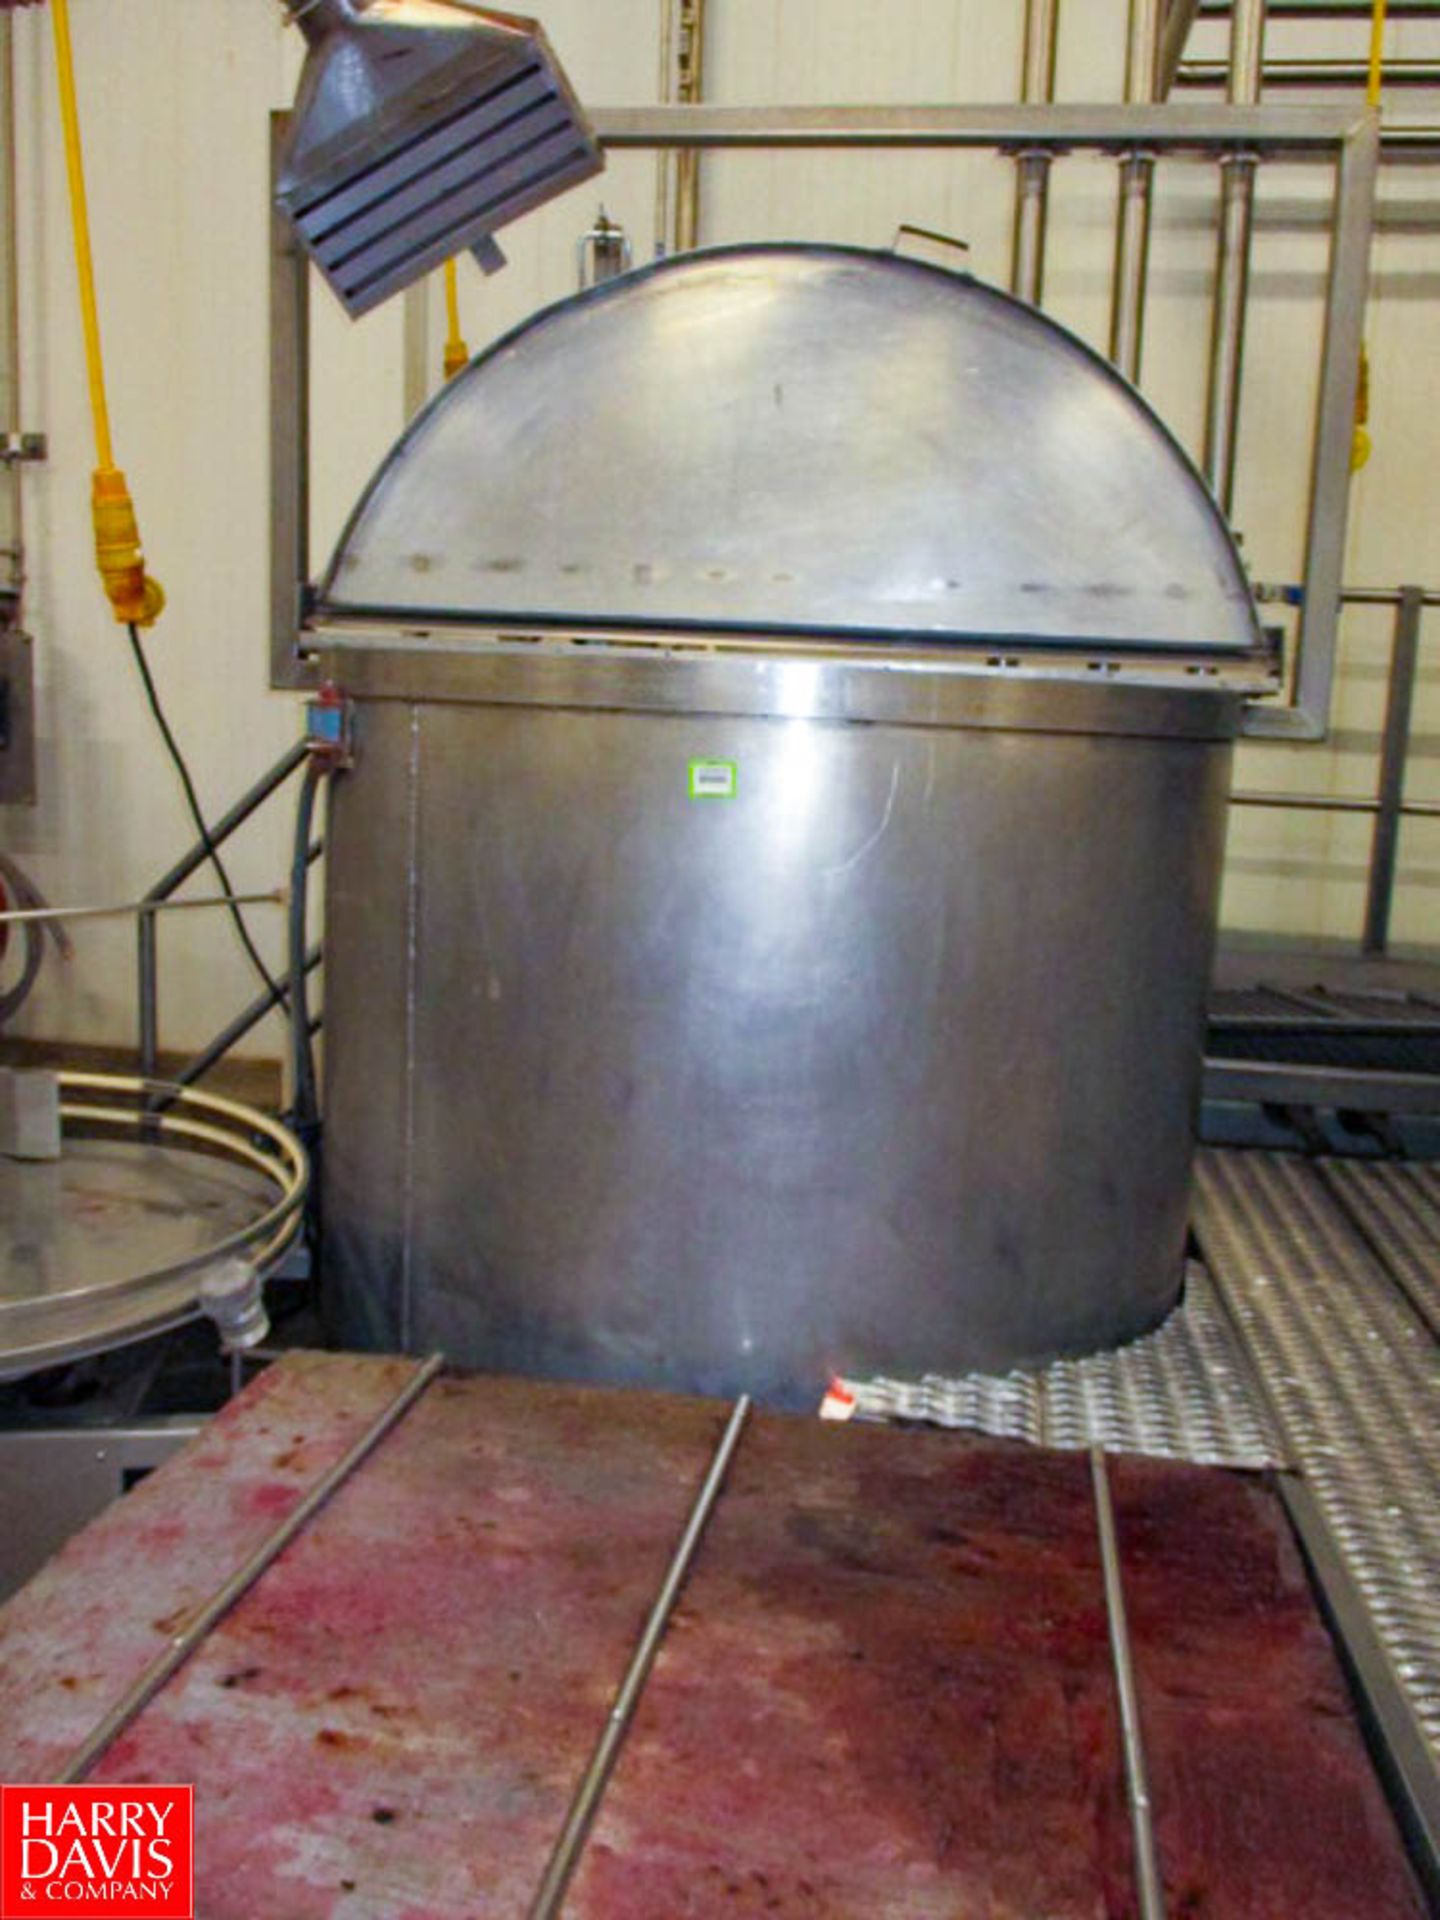 S/S Mixing Vessel with Baldor Electric Motor and Agitator HIT# 2322419 - Rigging Fee: $100